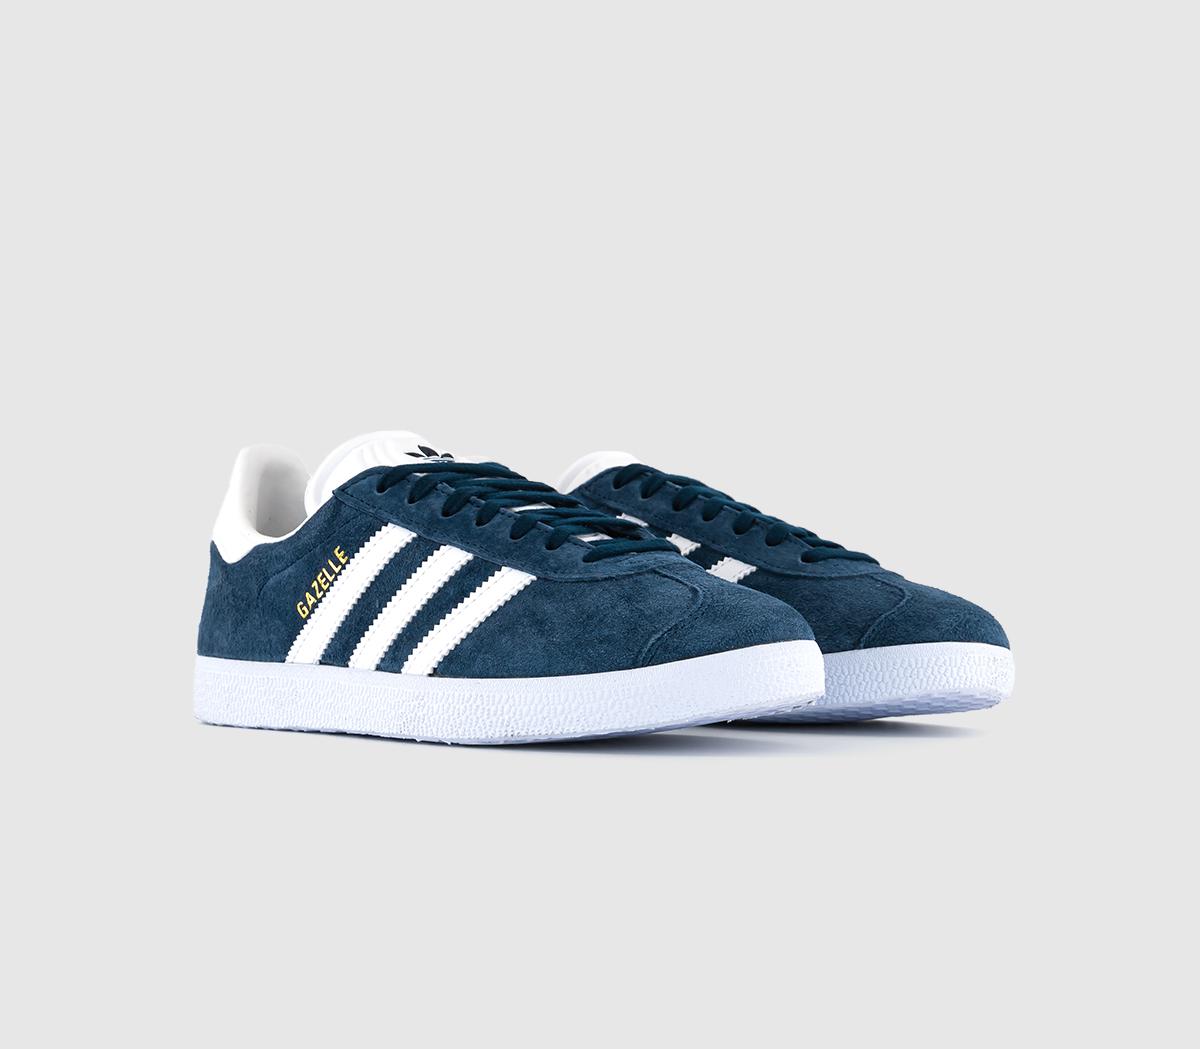 adidas Gazelle Trainers Collegiate Navy White - His trainers